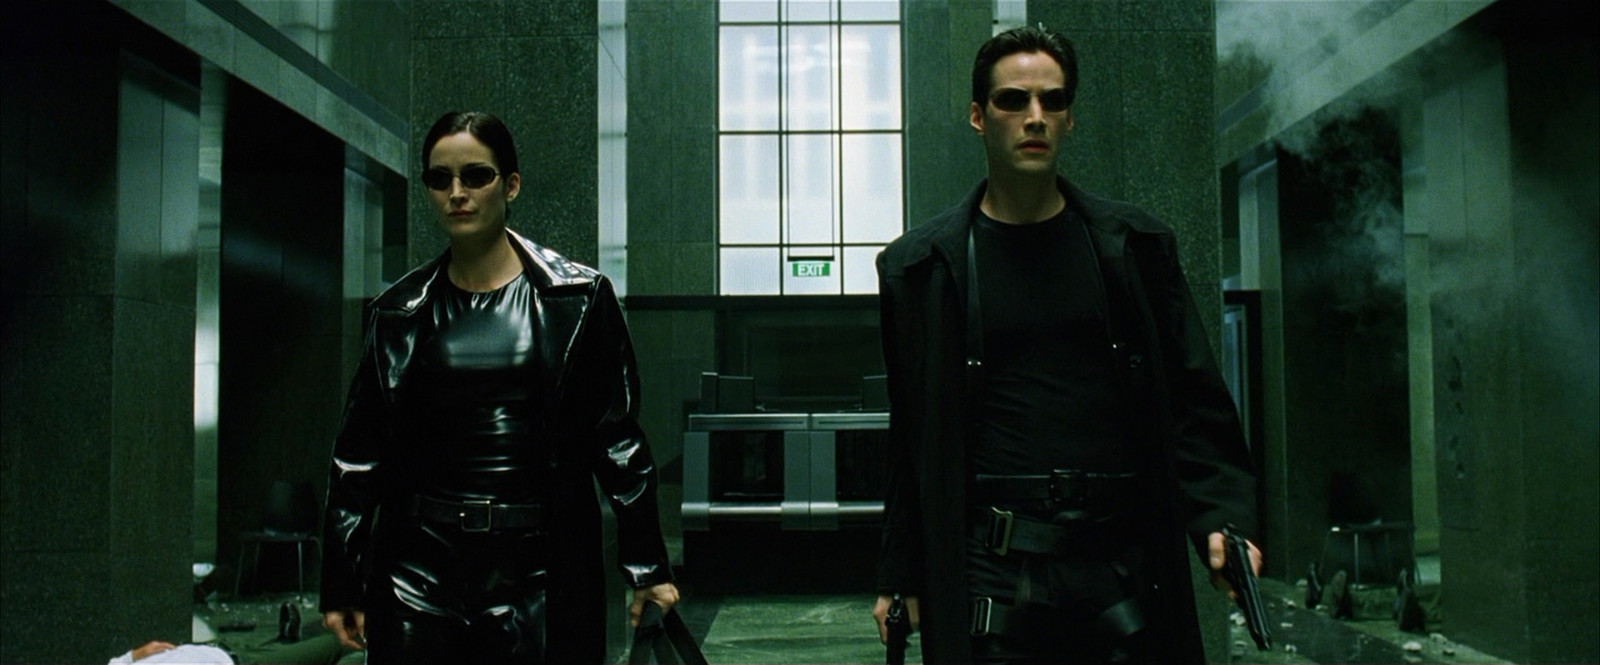 The first Matrix film has influenced the action genre in a big way | Warner Bros